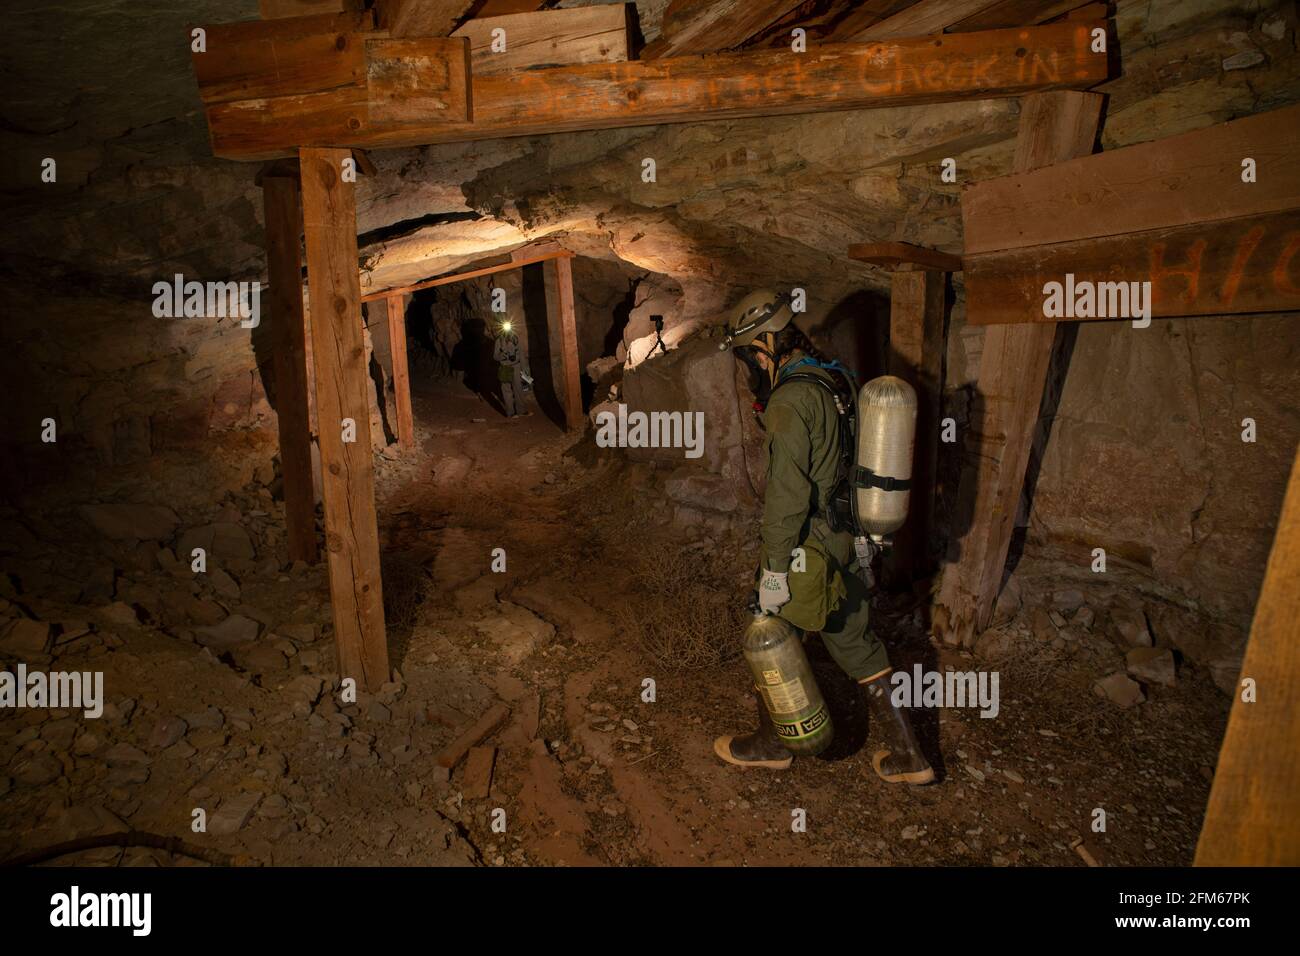 USA: Dillon Metcalf and Ethan Sandoval using SCBA gear to enter the Buckshot  uranium mine adit complex. THESE FEARLESS explorers have braved a uraniu Stock Photo